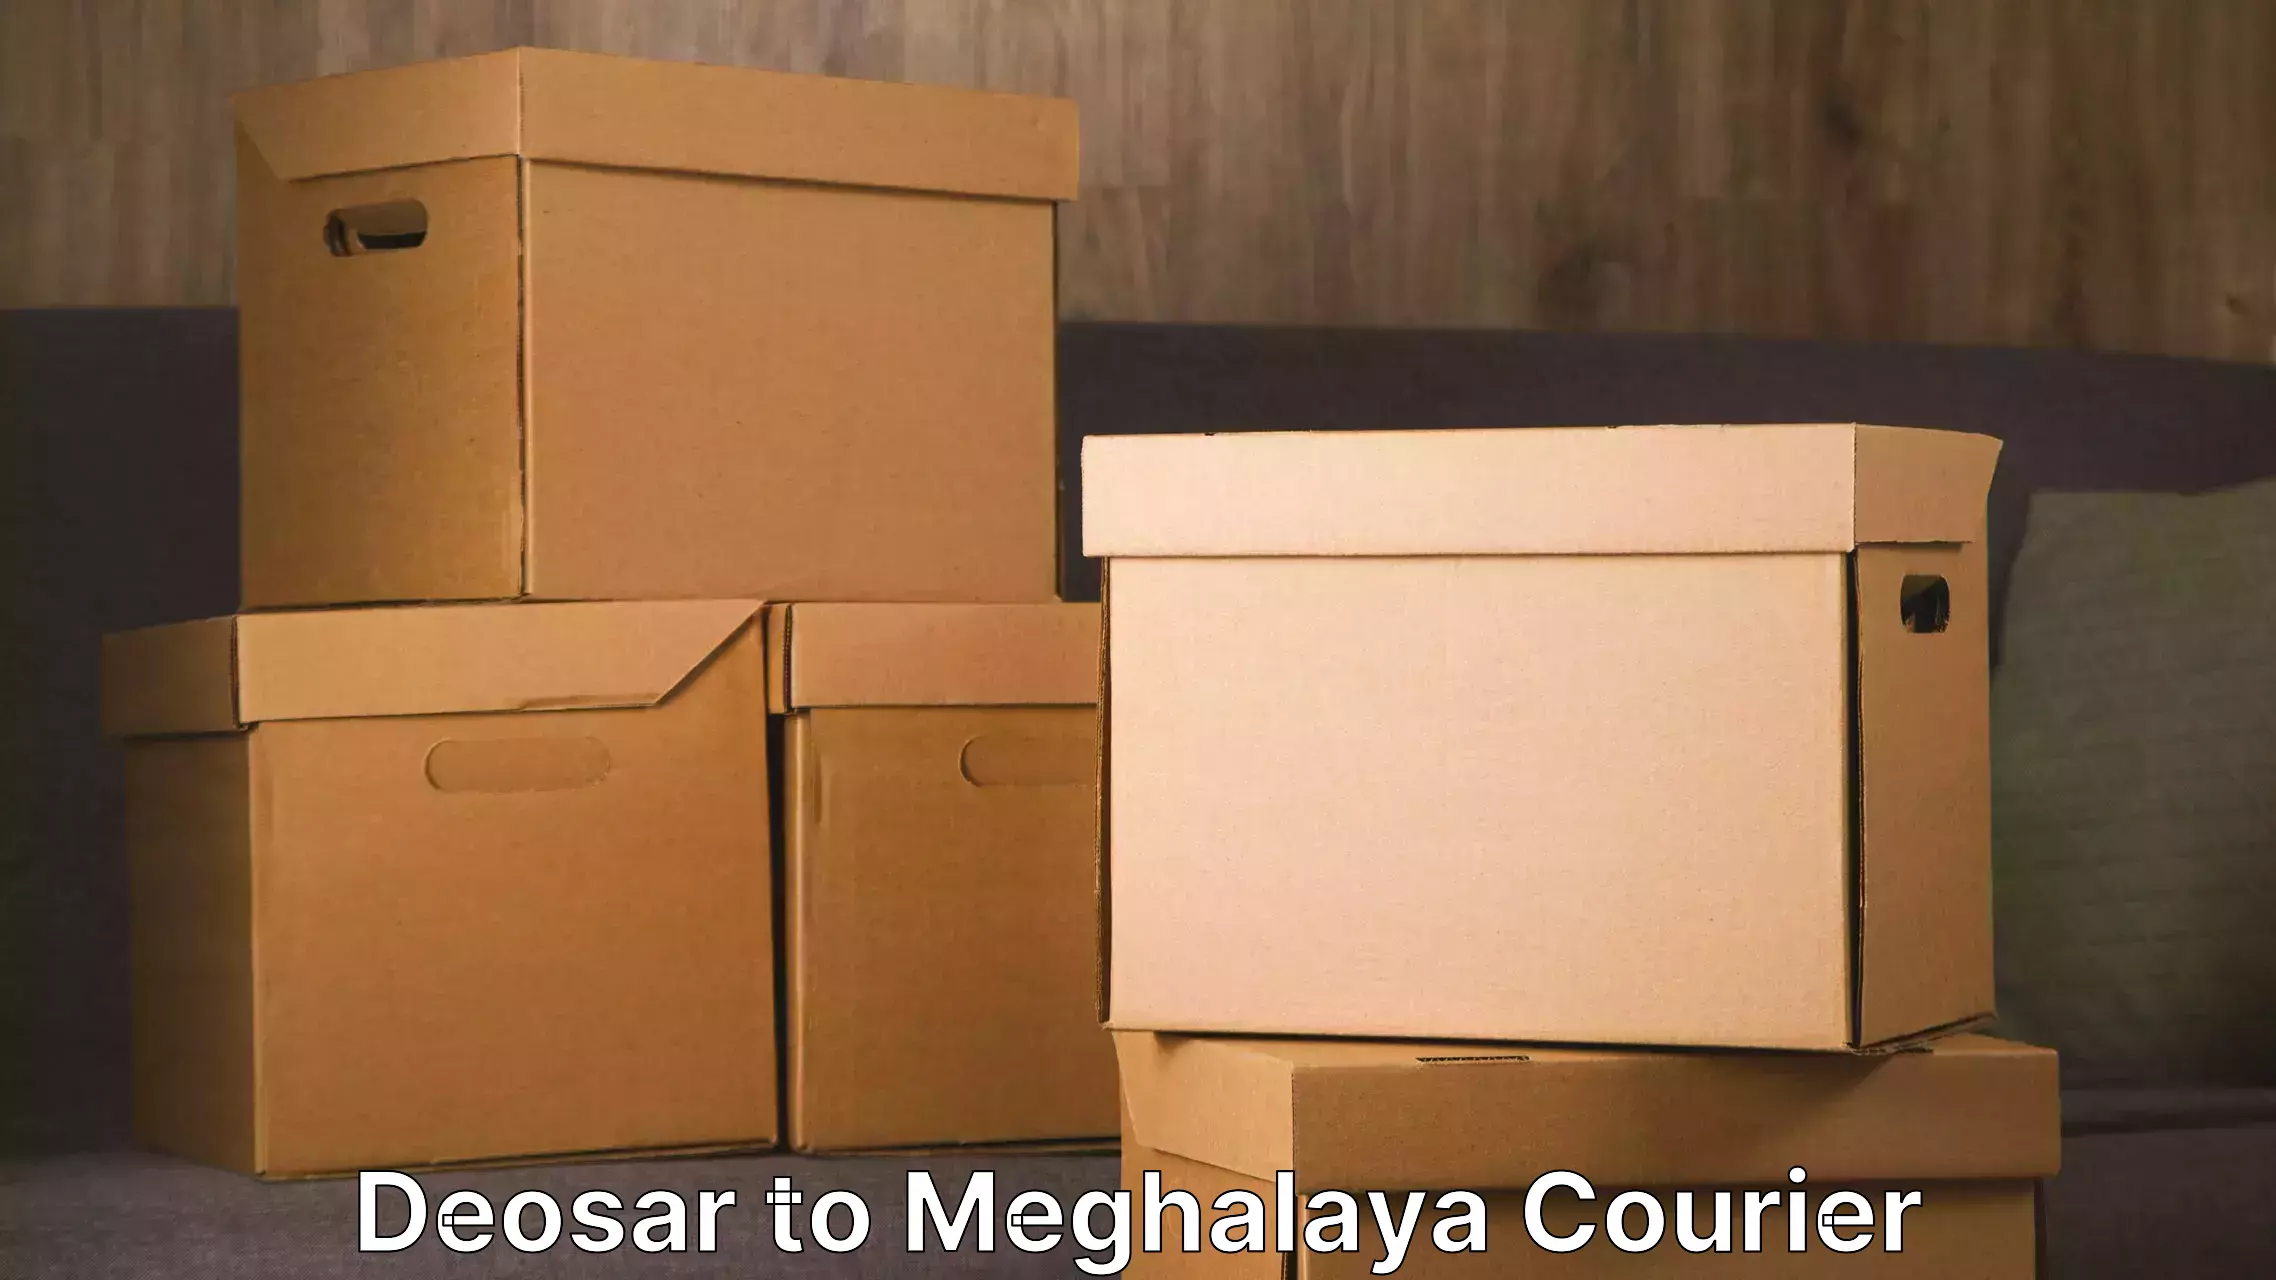 Professional moving company Deosar to Shillong